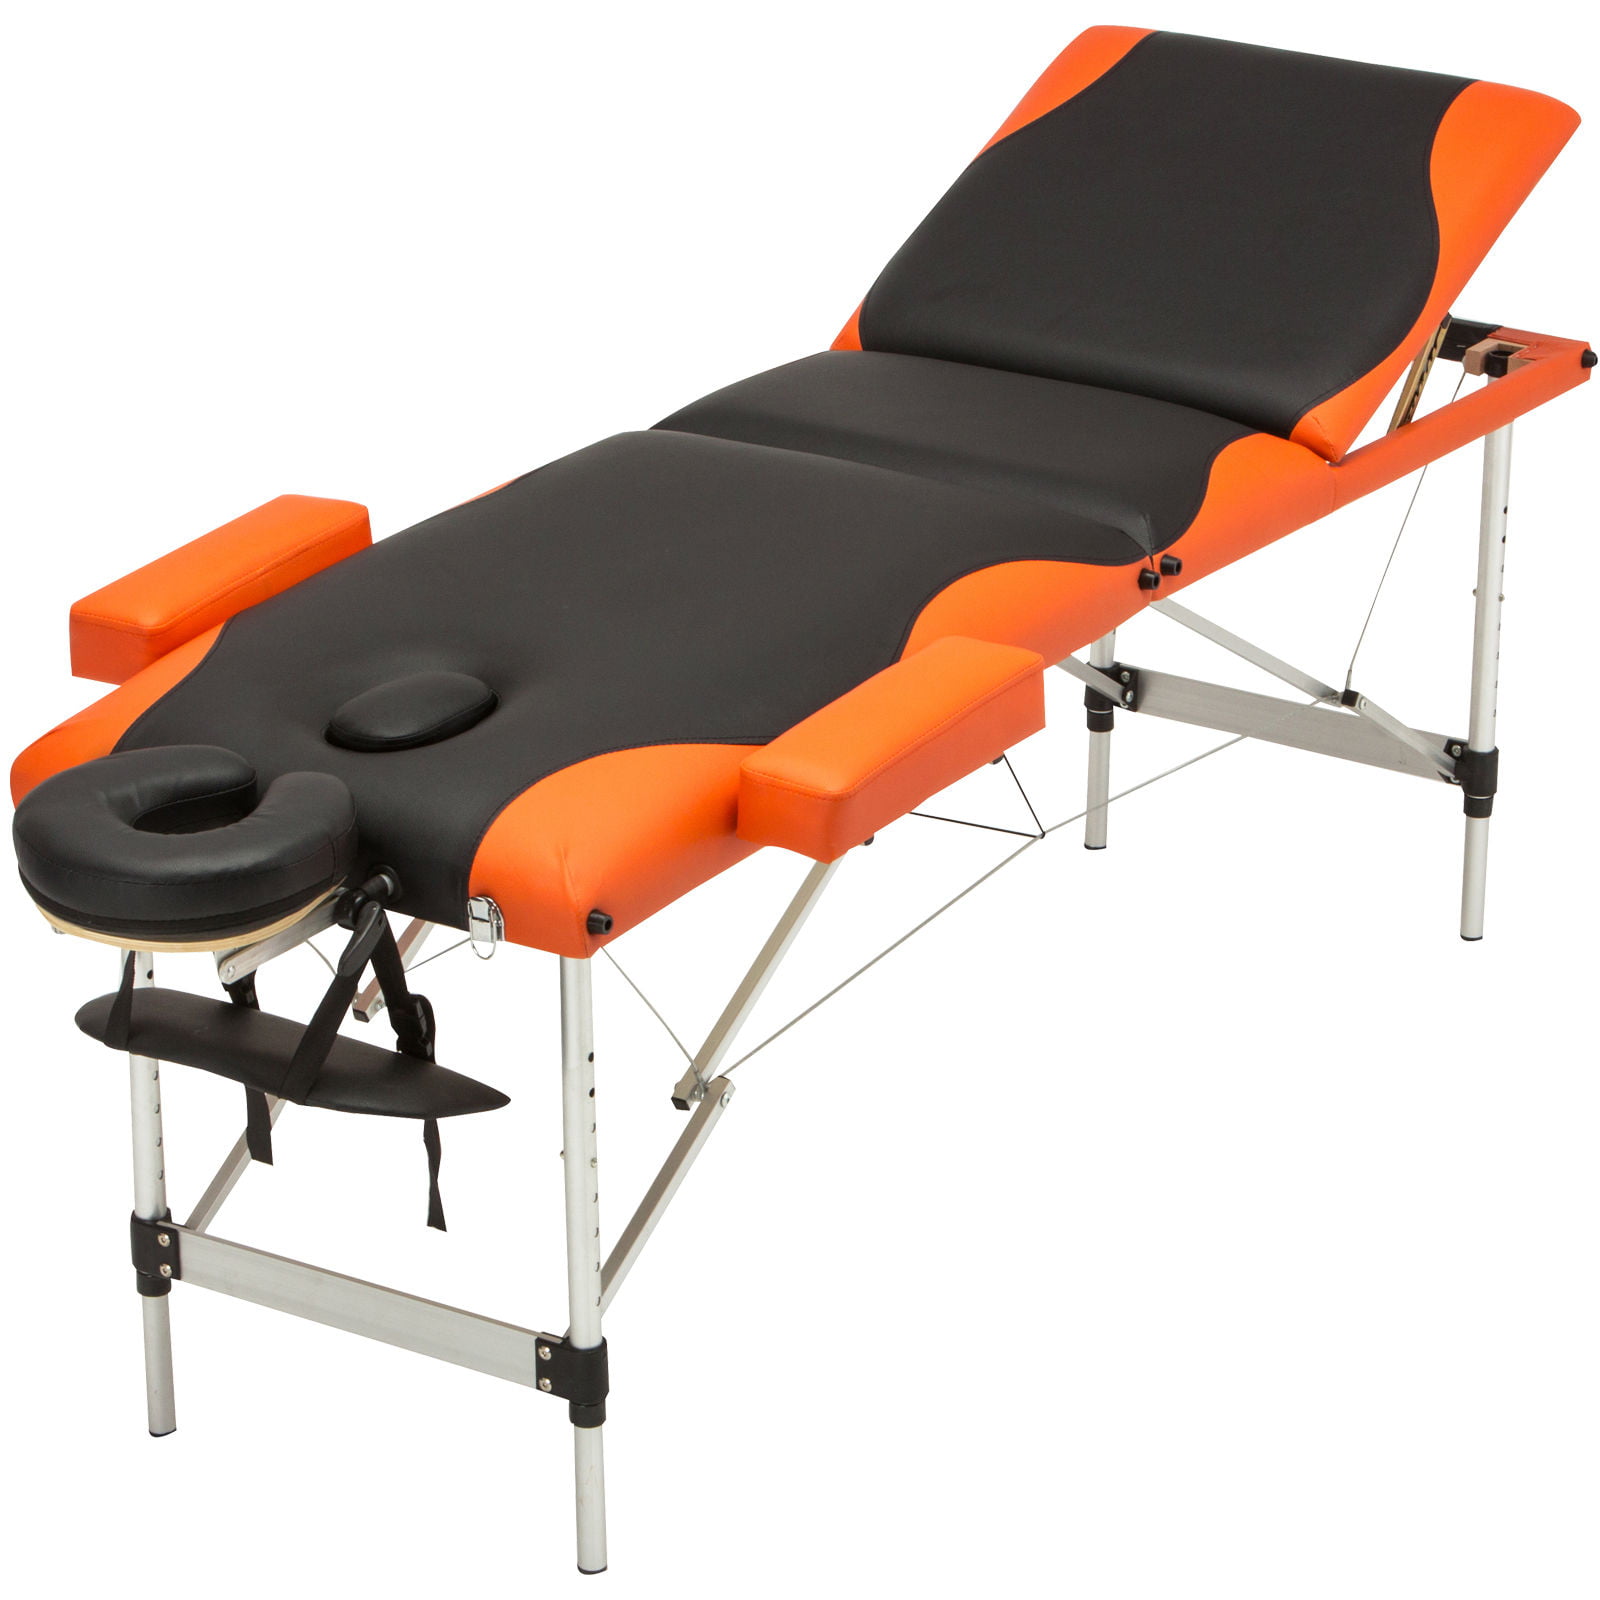 84l Folding Massage Table Aluminum Frame 3 Fold Portable Massage Bed With Carrying Bag 3 Fold